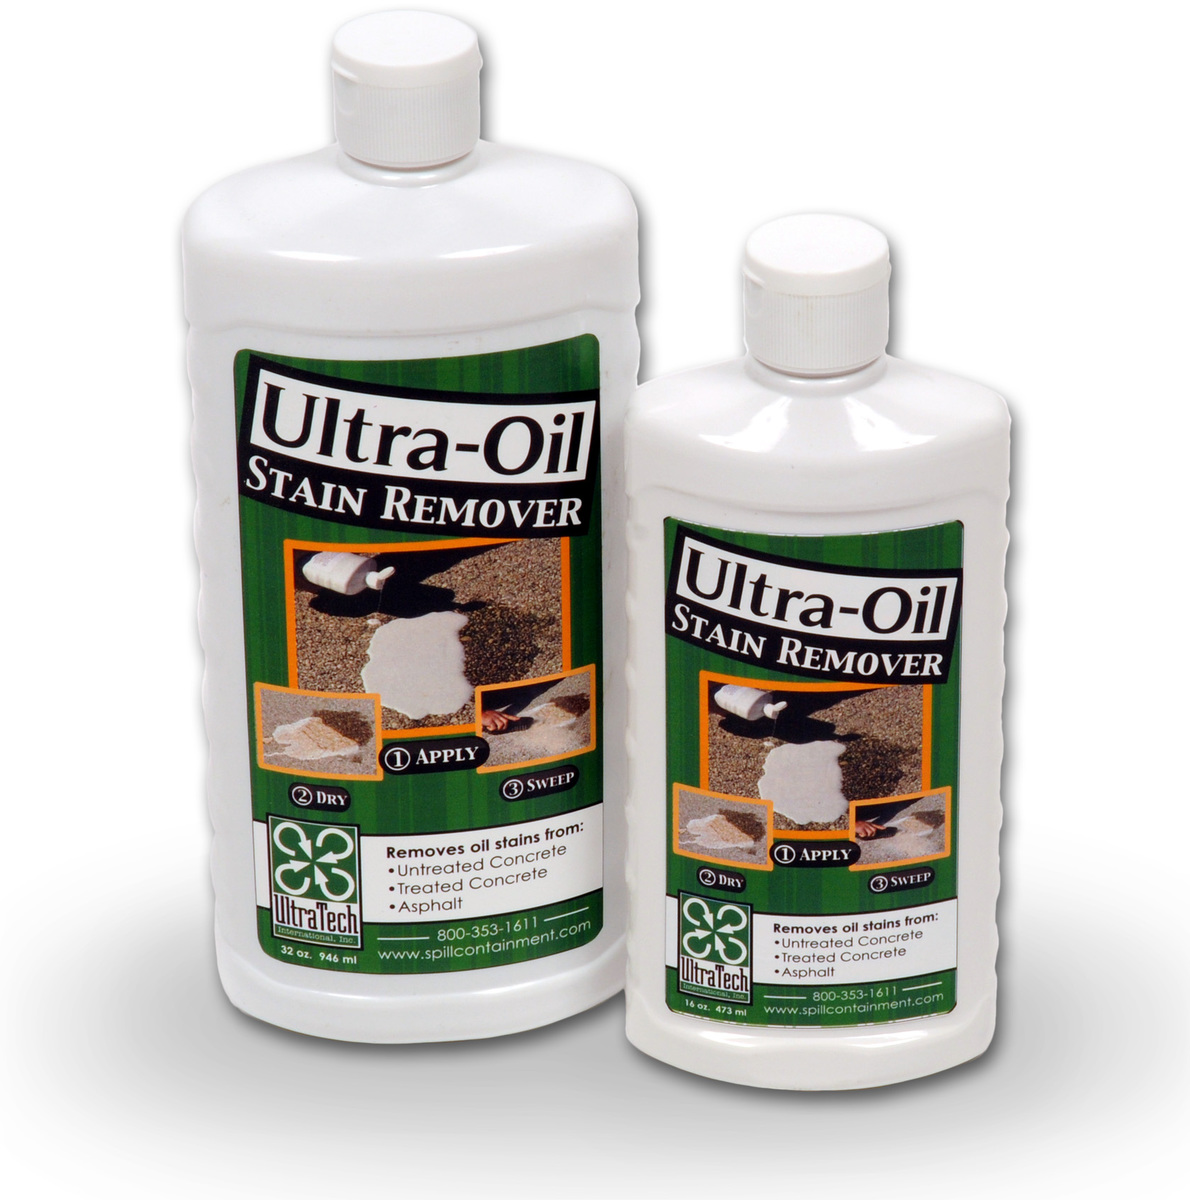 UltraTech 32 oz Ultra-Oil Stain Remover® White Citrus Based Phosphate Free And Environmentally Friendly Liquid Oil Stain Remover